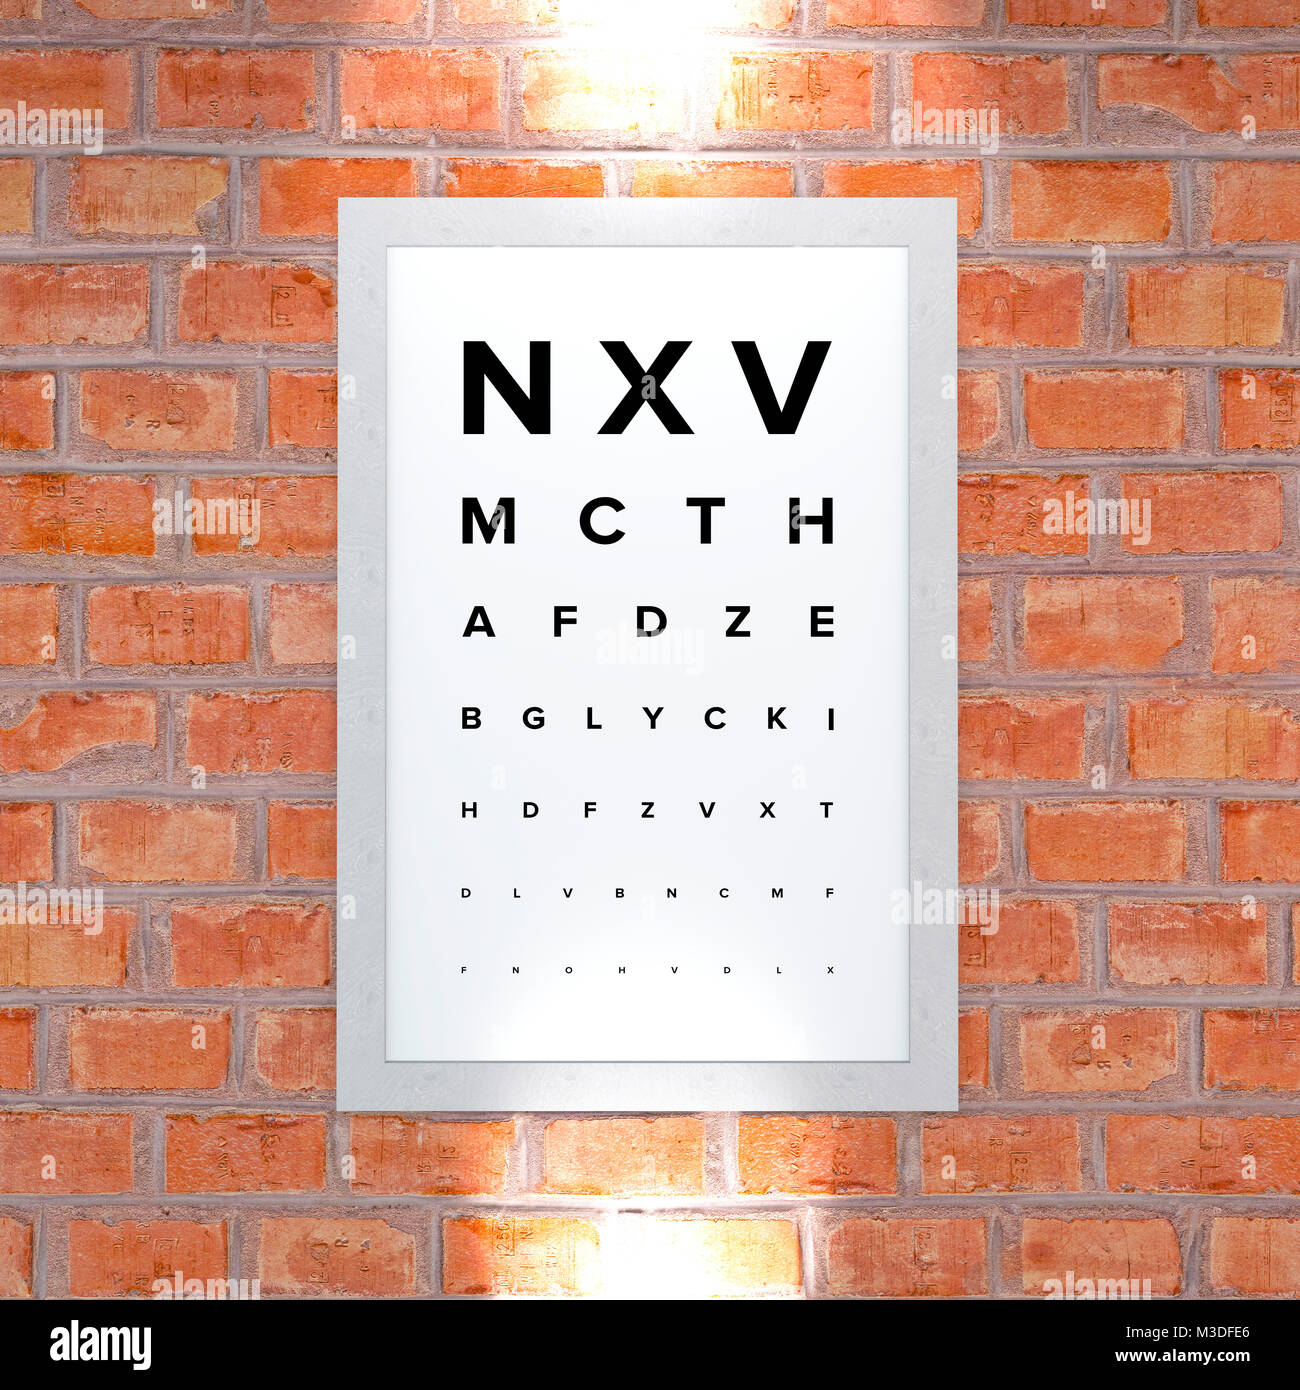 Measurement table of sight. Framework hanging on a brick wall. View examination. Letters in block letters. Eye test. Visual Acuity Stock Photo